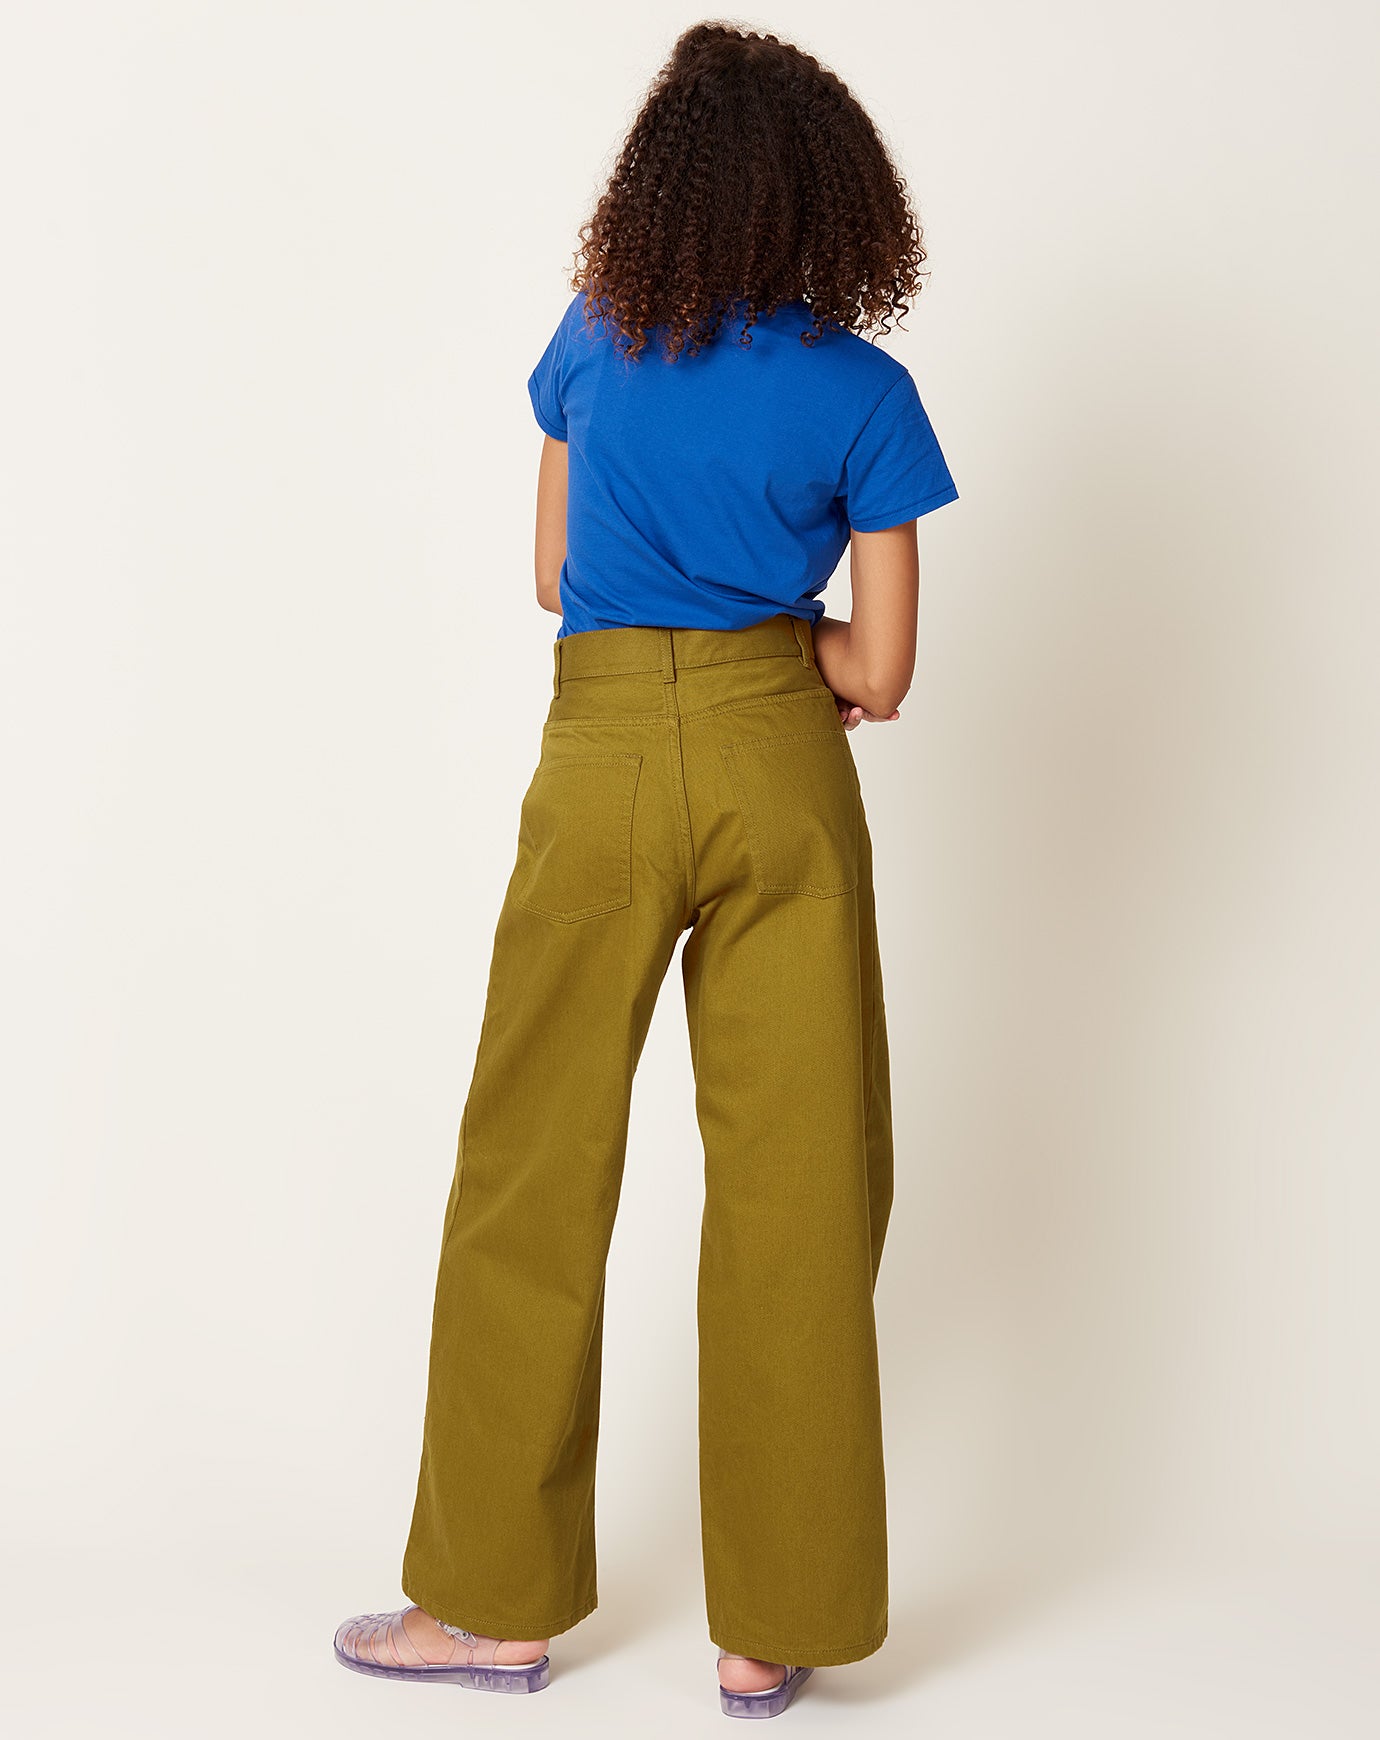 Kowtow Sailor Jeans in Chartreuse